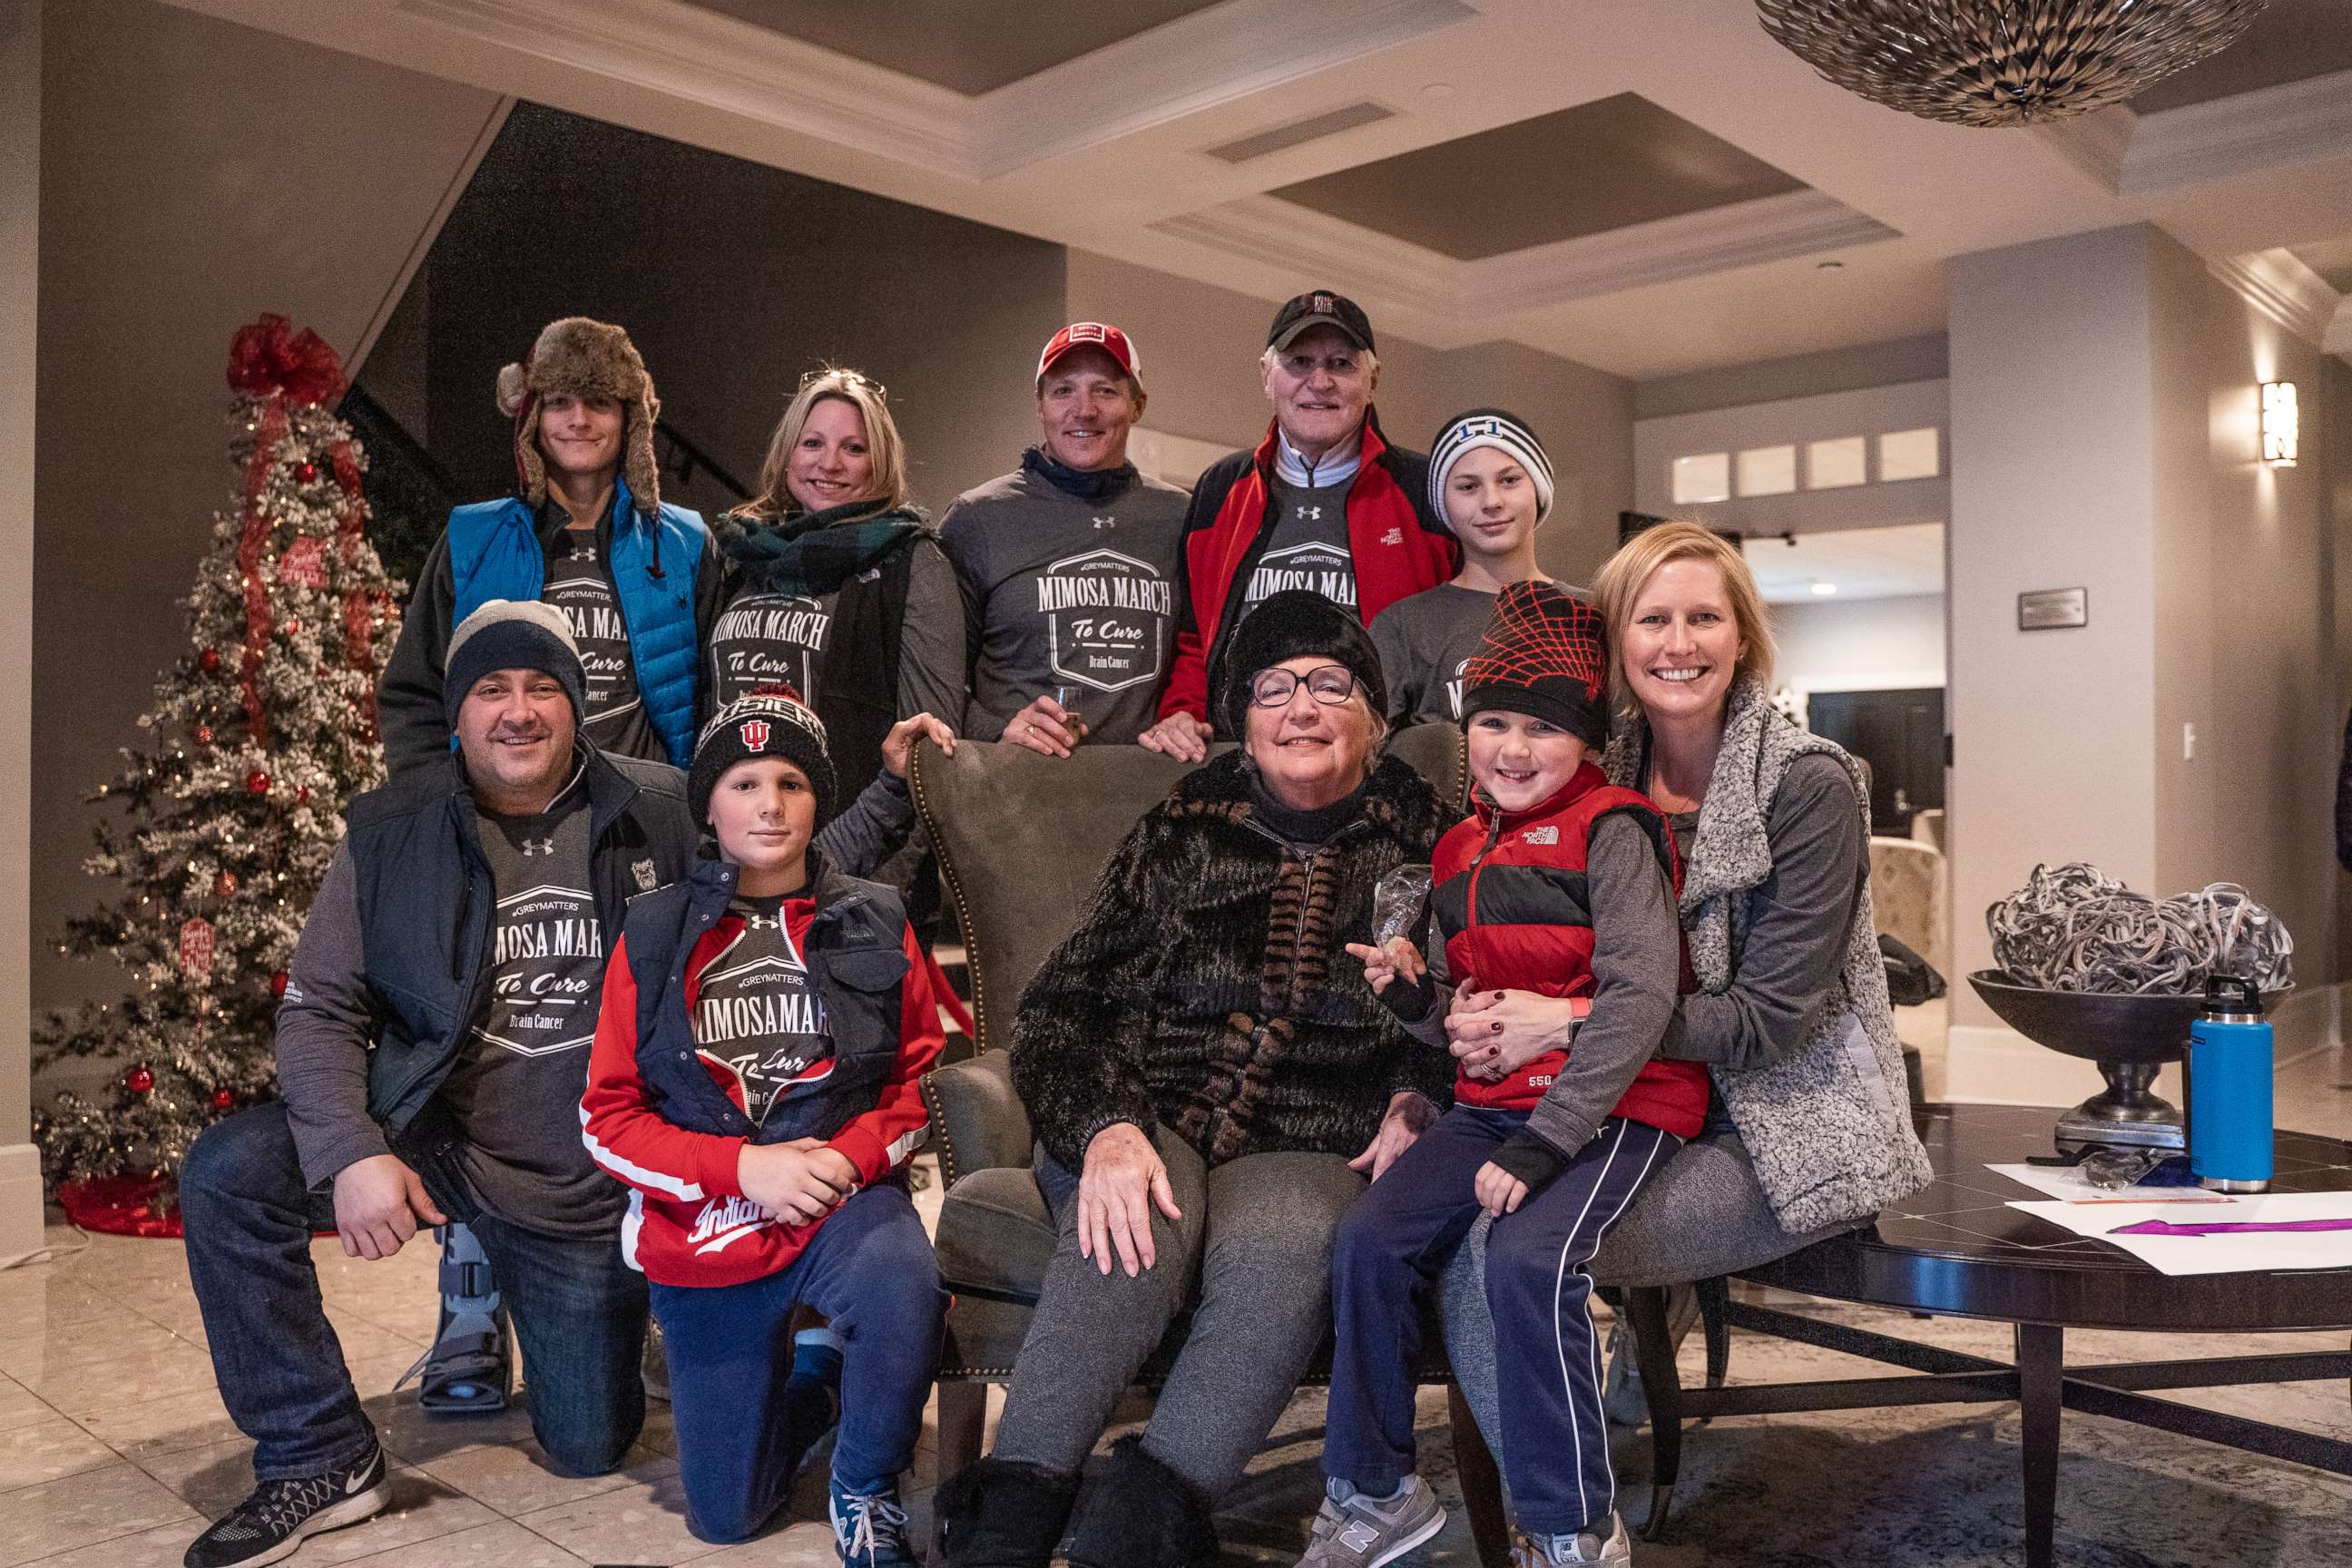 PHOTO: Nancy Maiers, 71, of Carmel, Indiana, was diagnosed with a brain tumor Jan. 2019. In this photo dated Thanksgiving 2019, Nancy is surrounded by her children, grandchildren and her husband of 50 years, Greg.